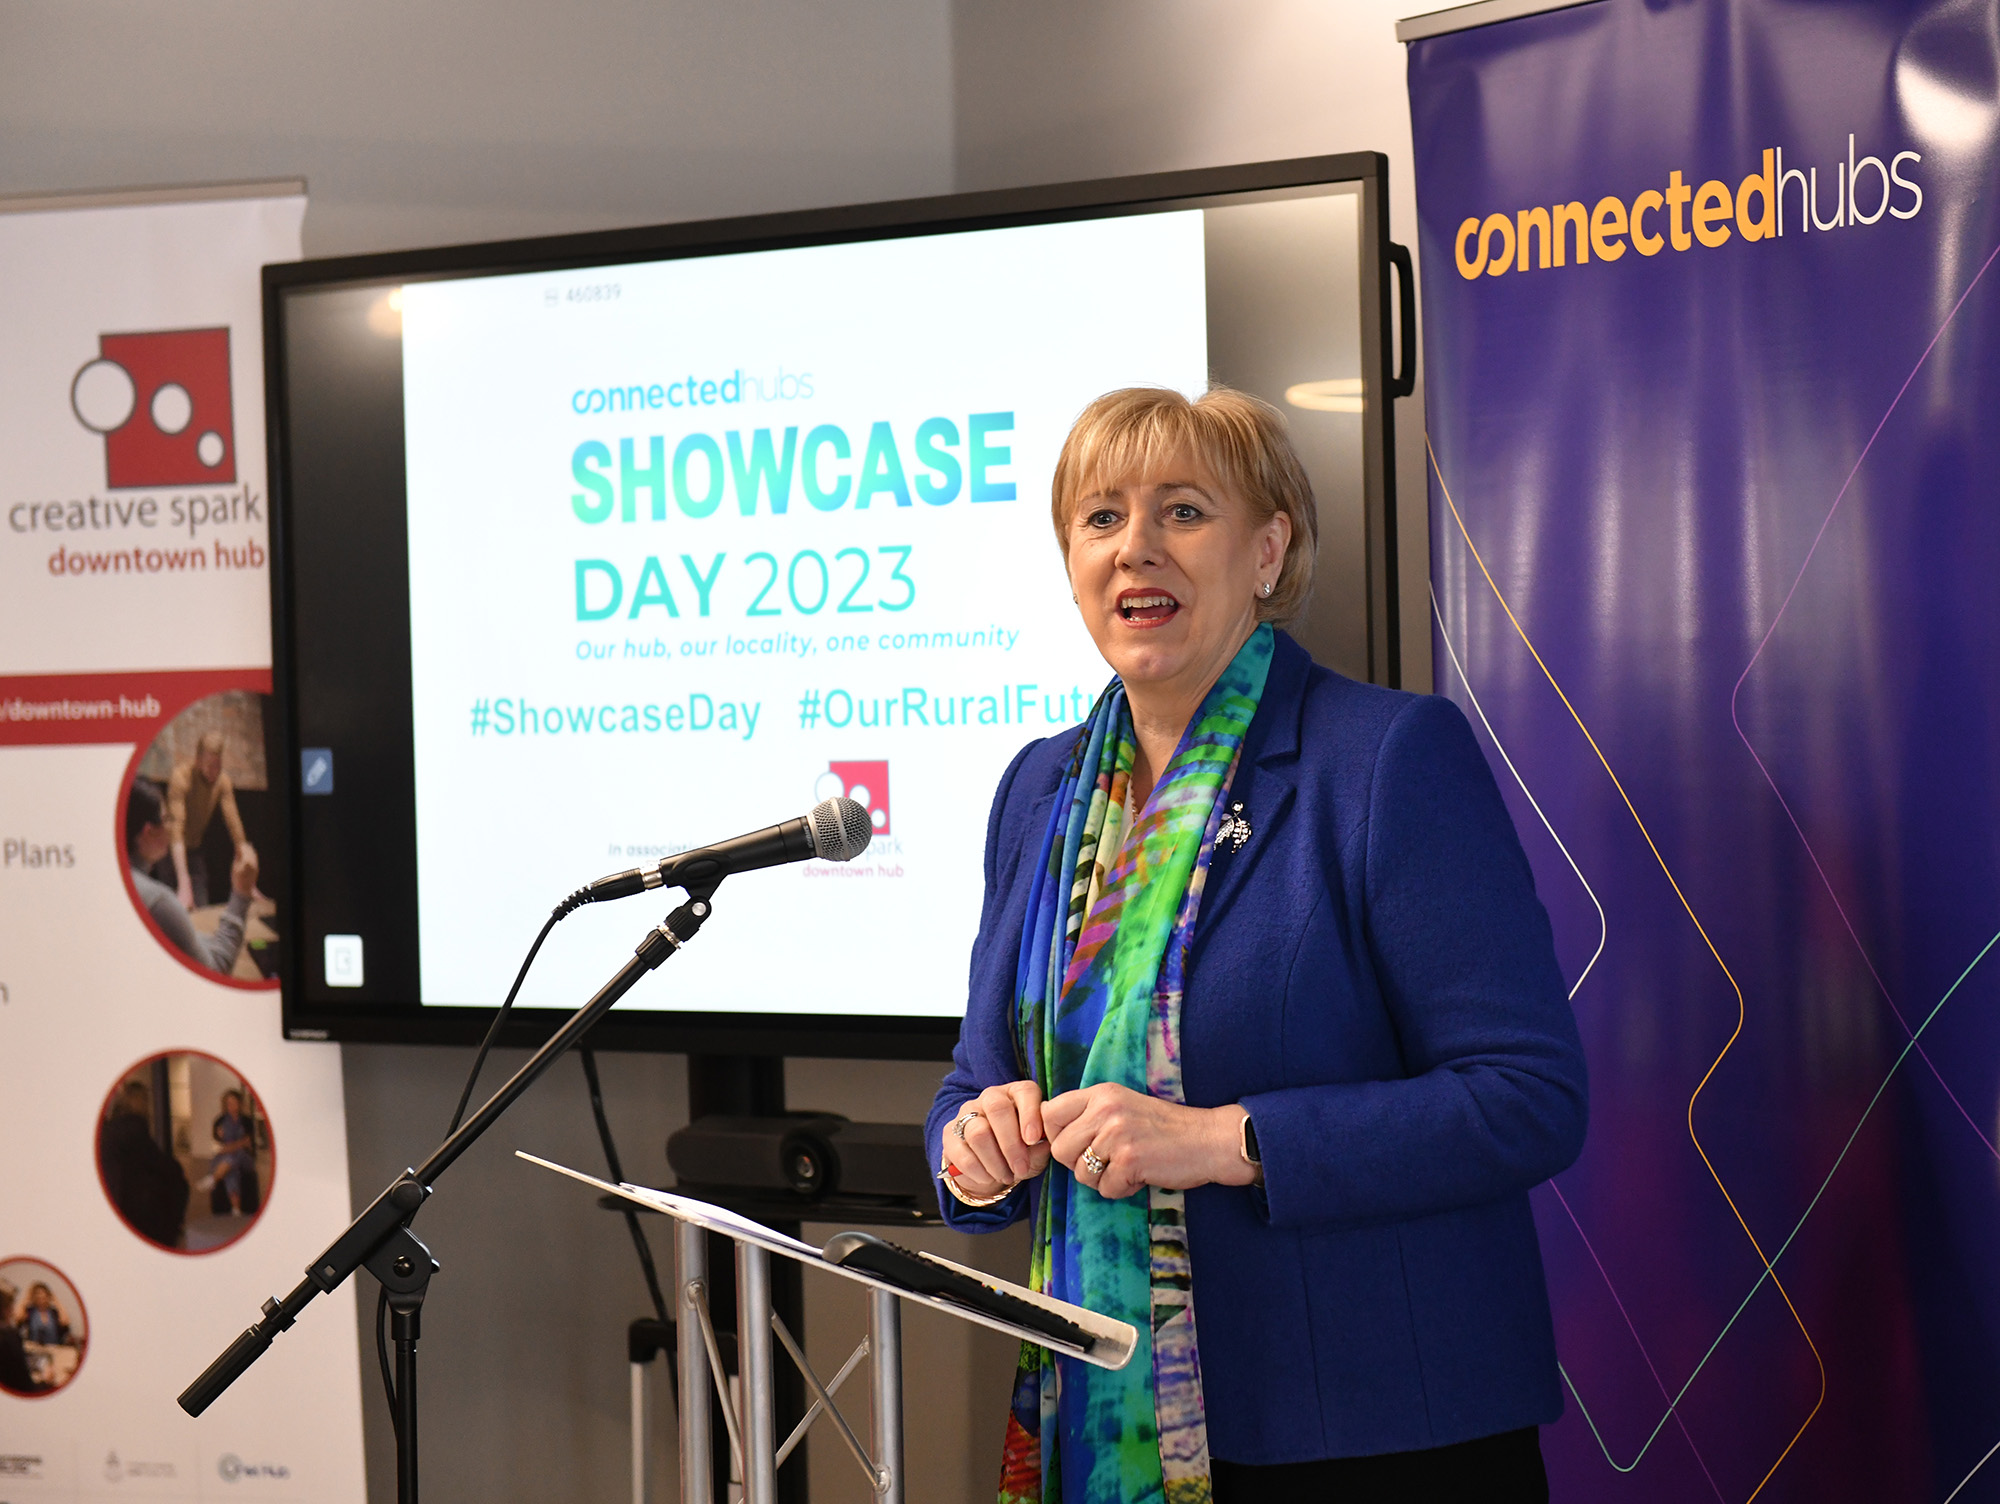 Our Rural Future: Minister Humphreys launches national ‘Connected Hubs Showcase Day’